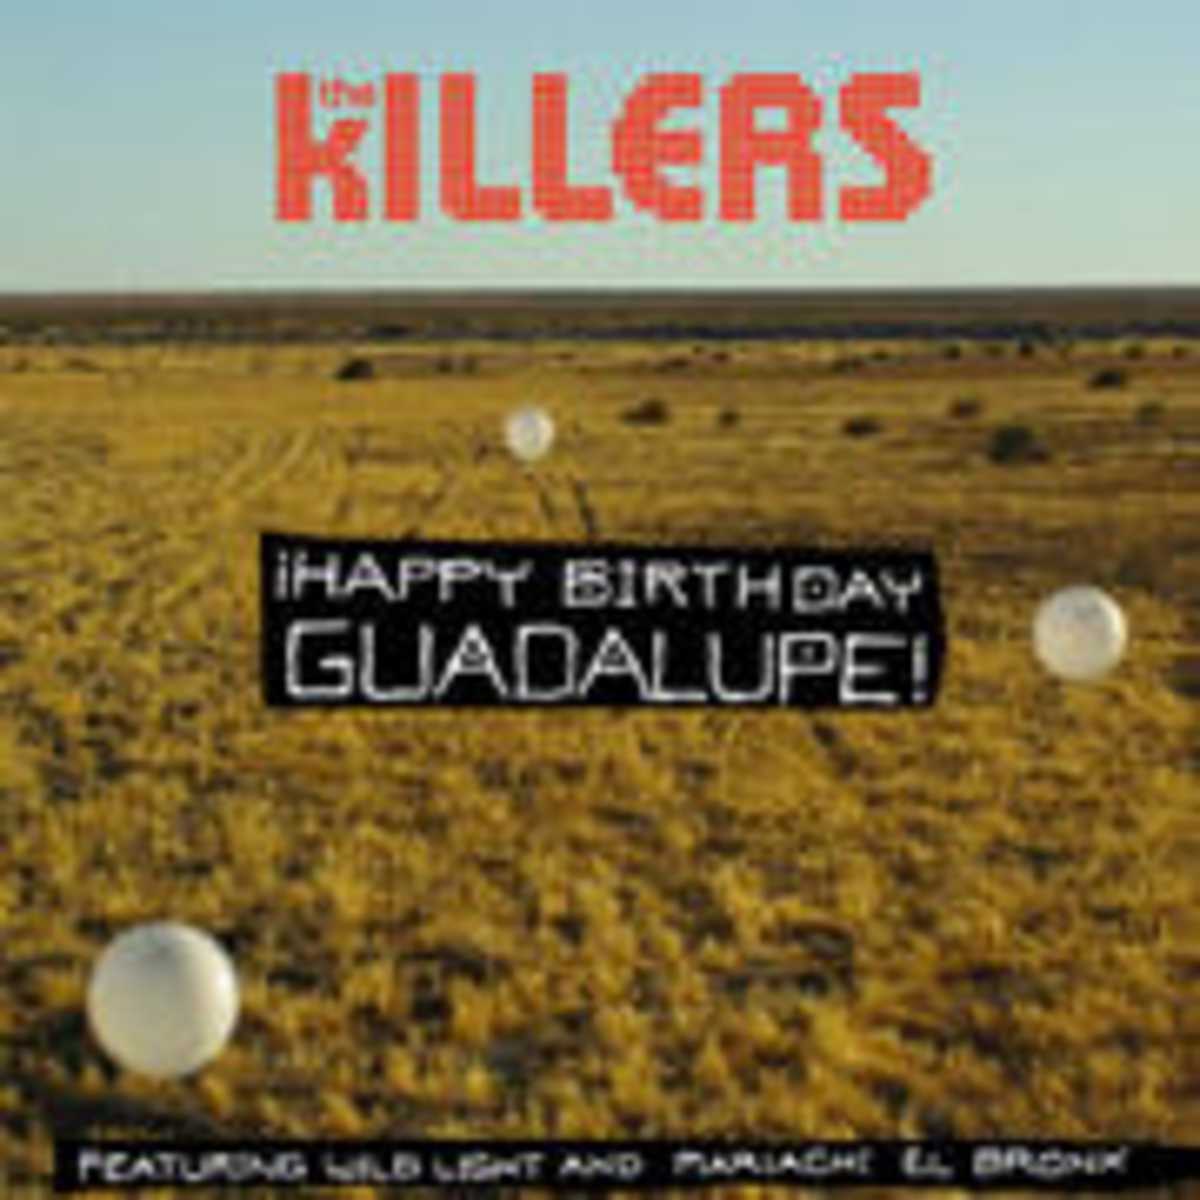 The Killers - Happy Birthday Guadalupe